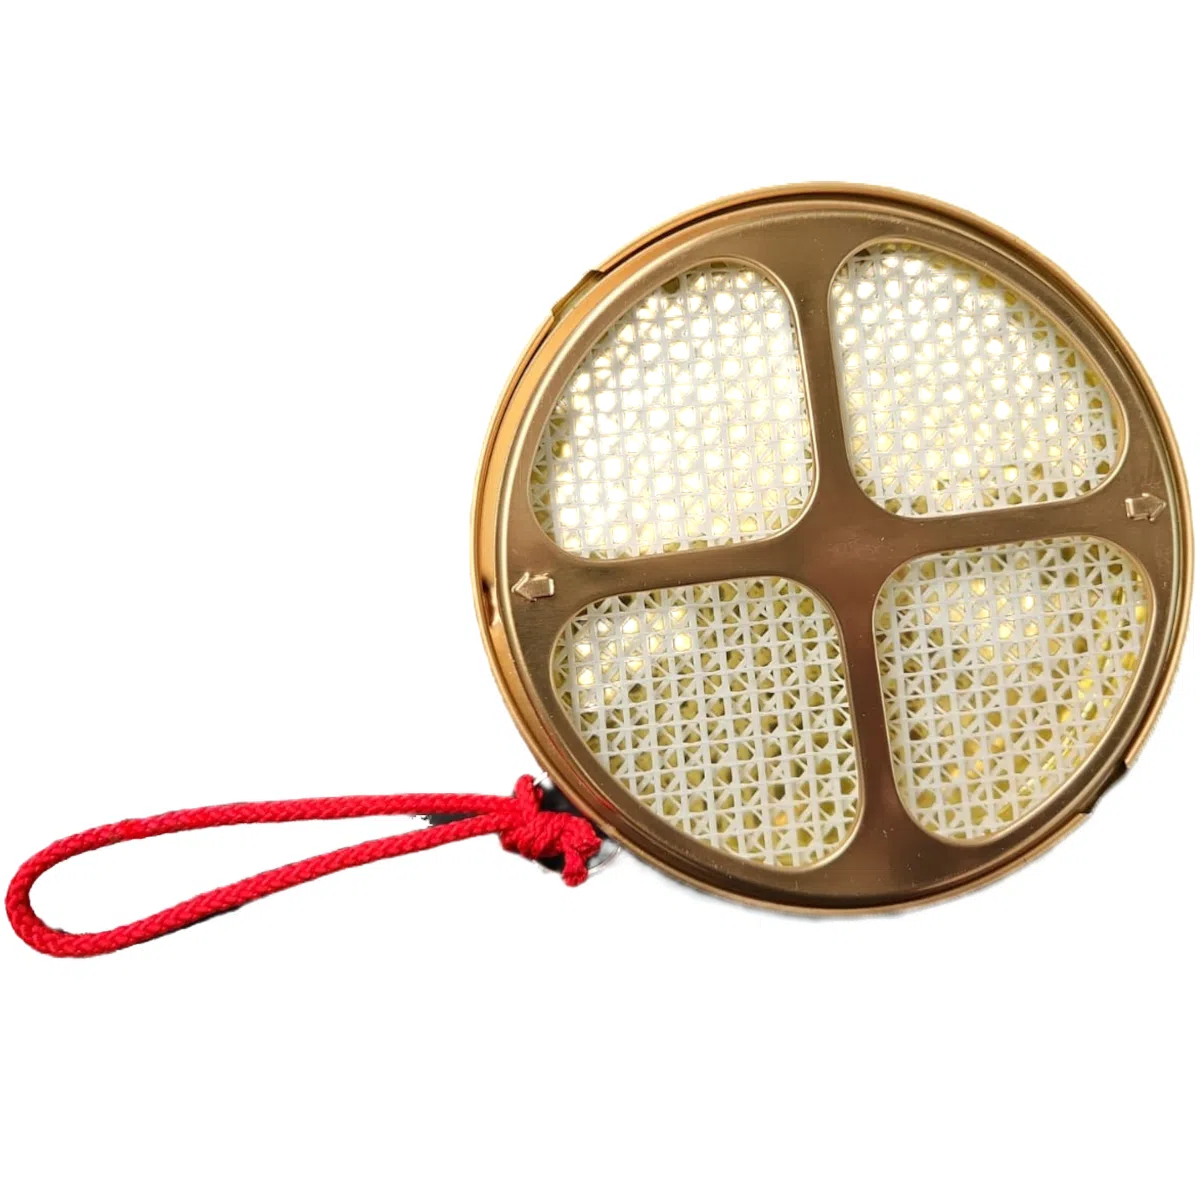 Coghlans Mosquito Coil Holder